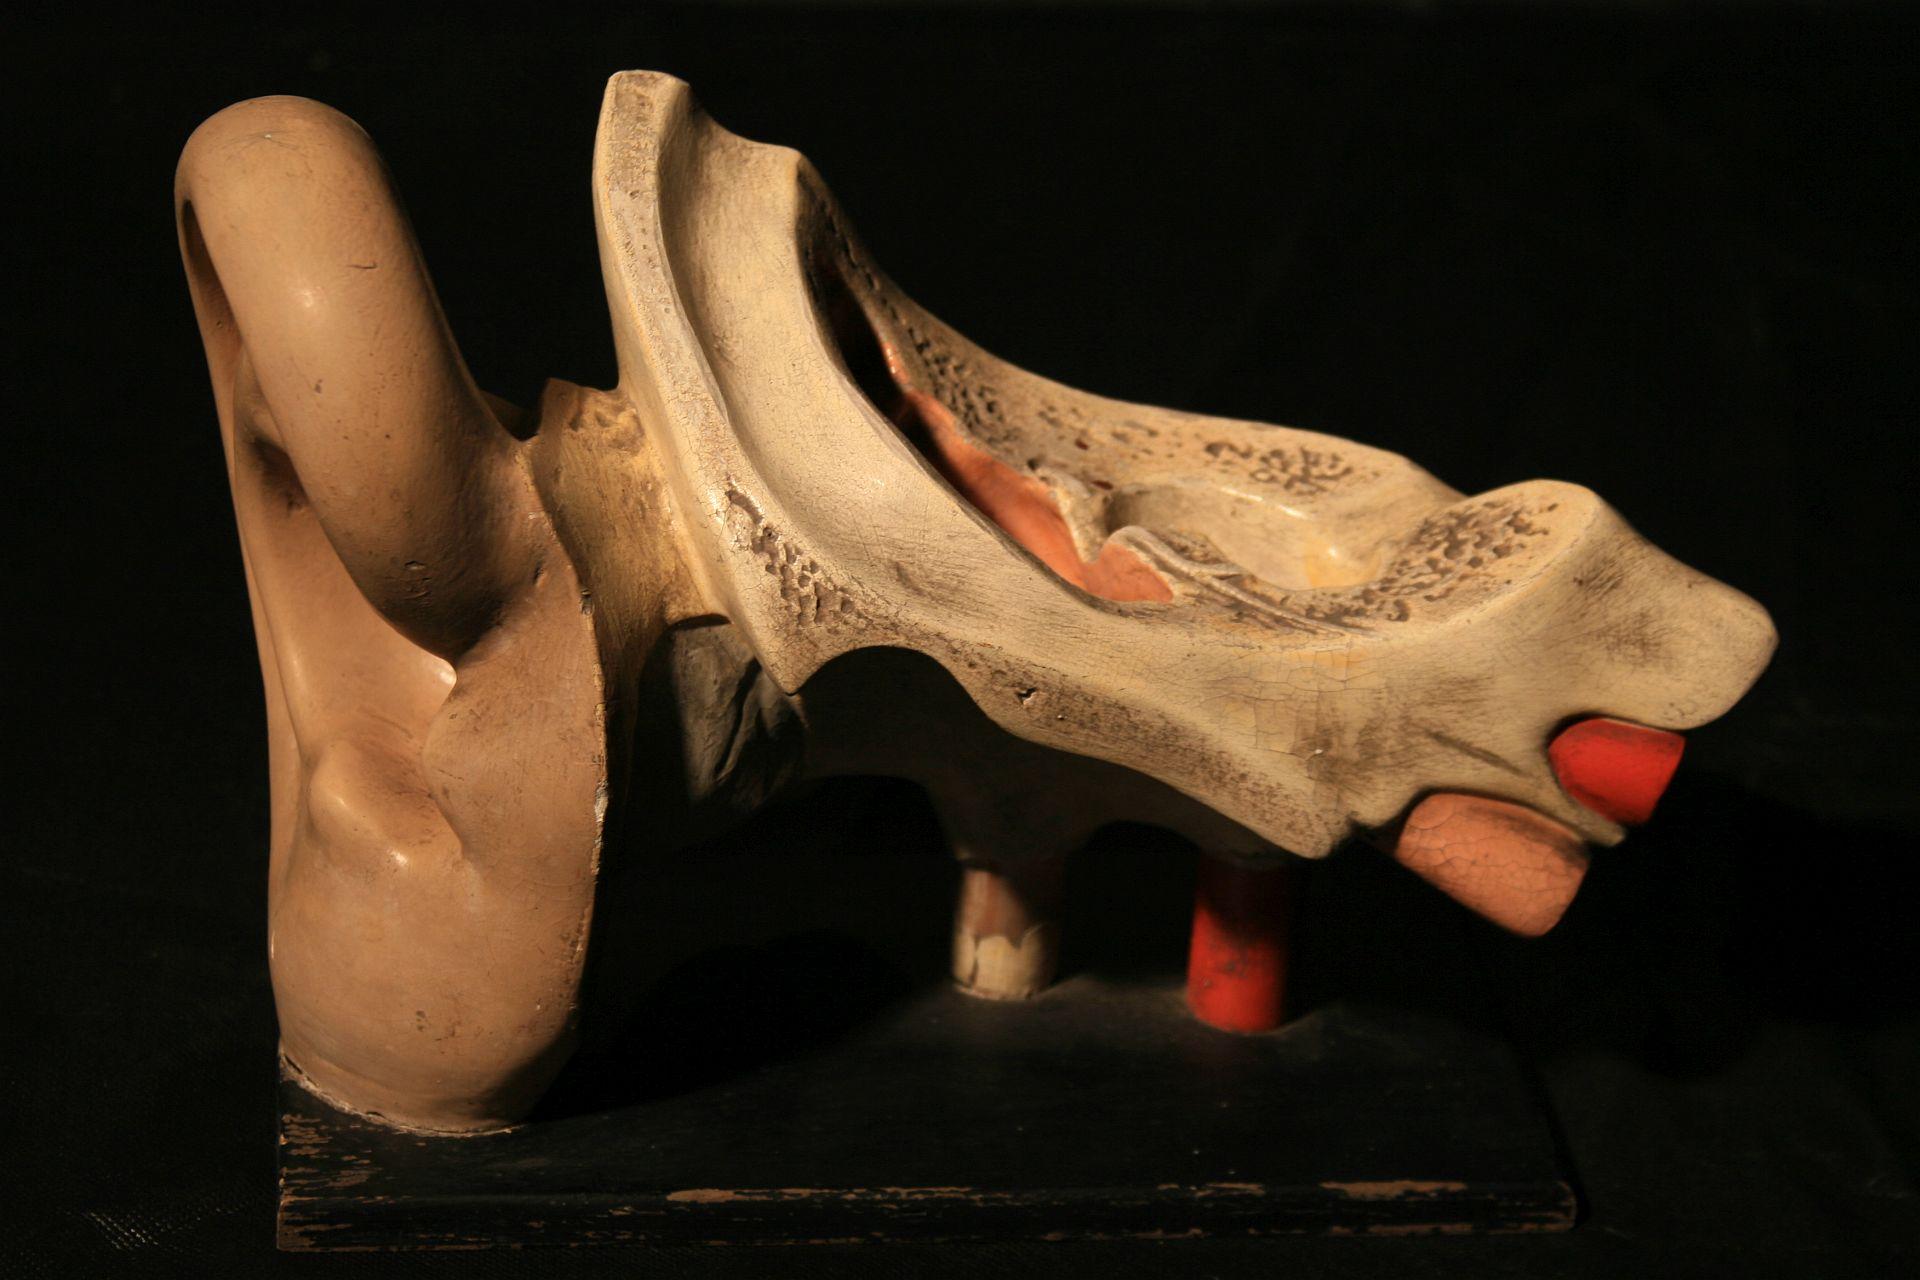 Anatomical model from the 1930s of the human ear produced by the Somso Sonenberg Germany company. A plaster model hand painted on a wooden base. Well-preserved manufacturer's signatures. basis.